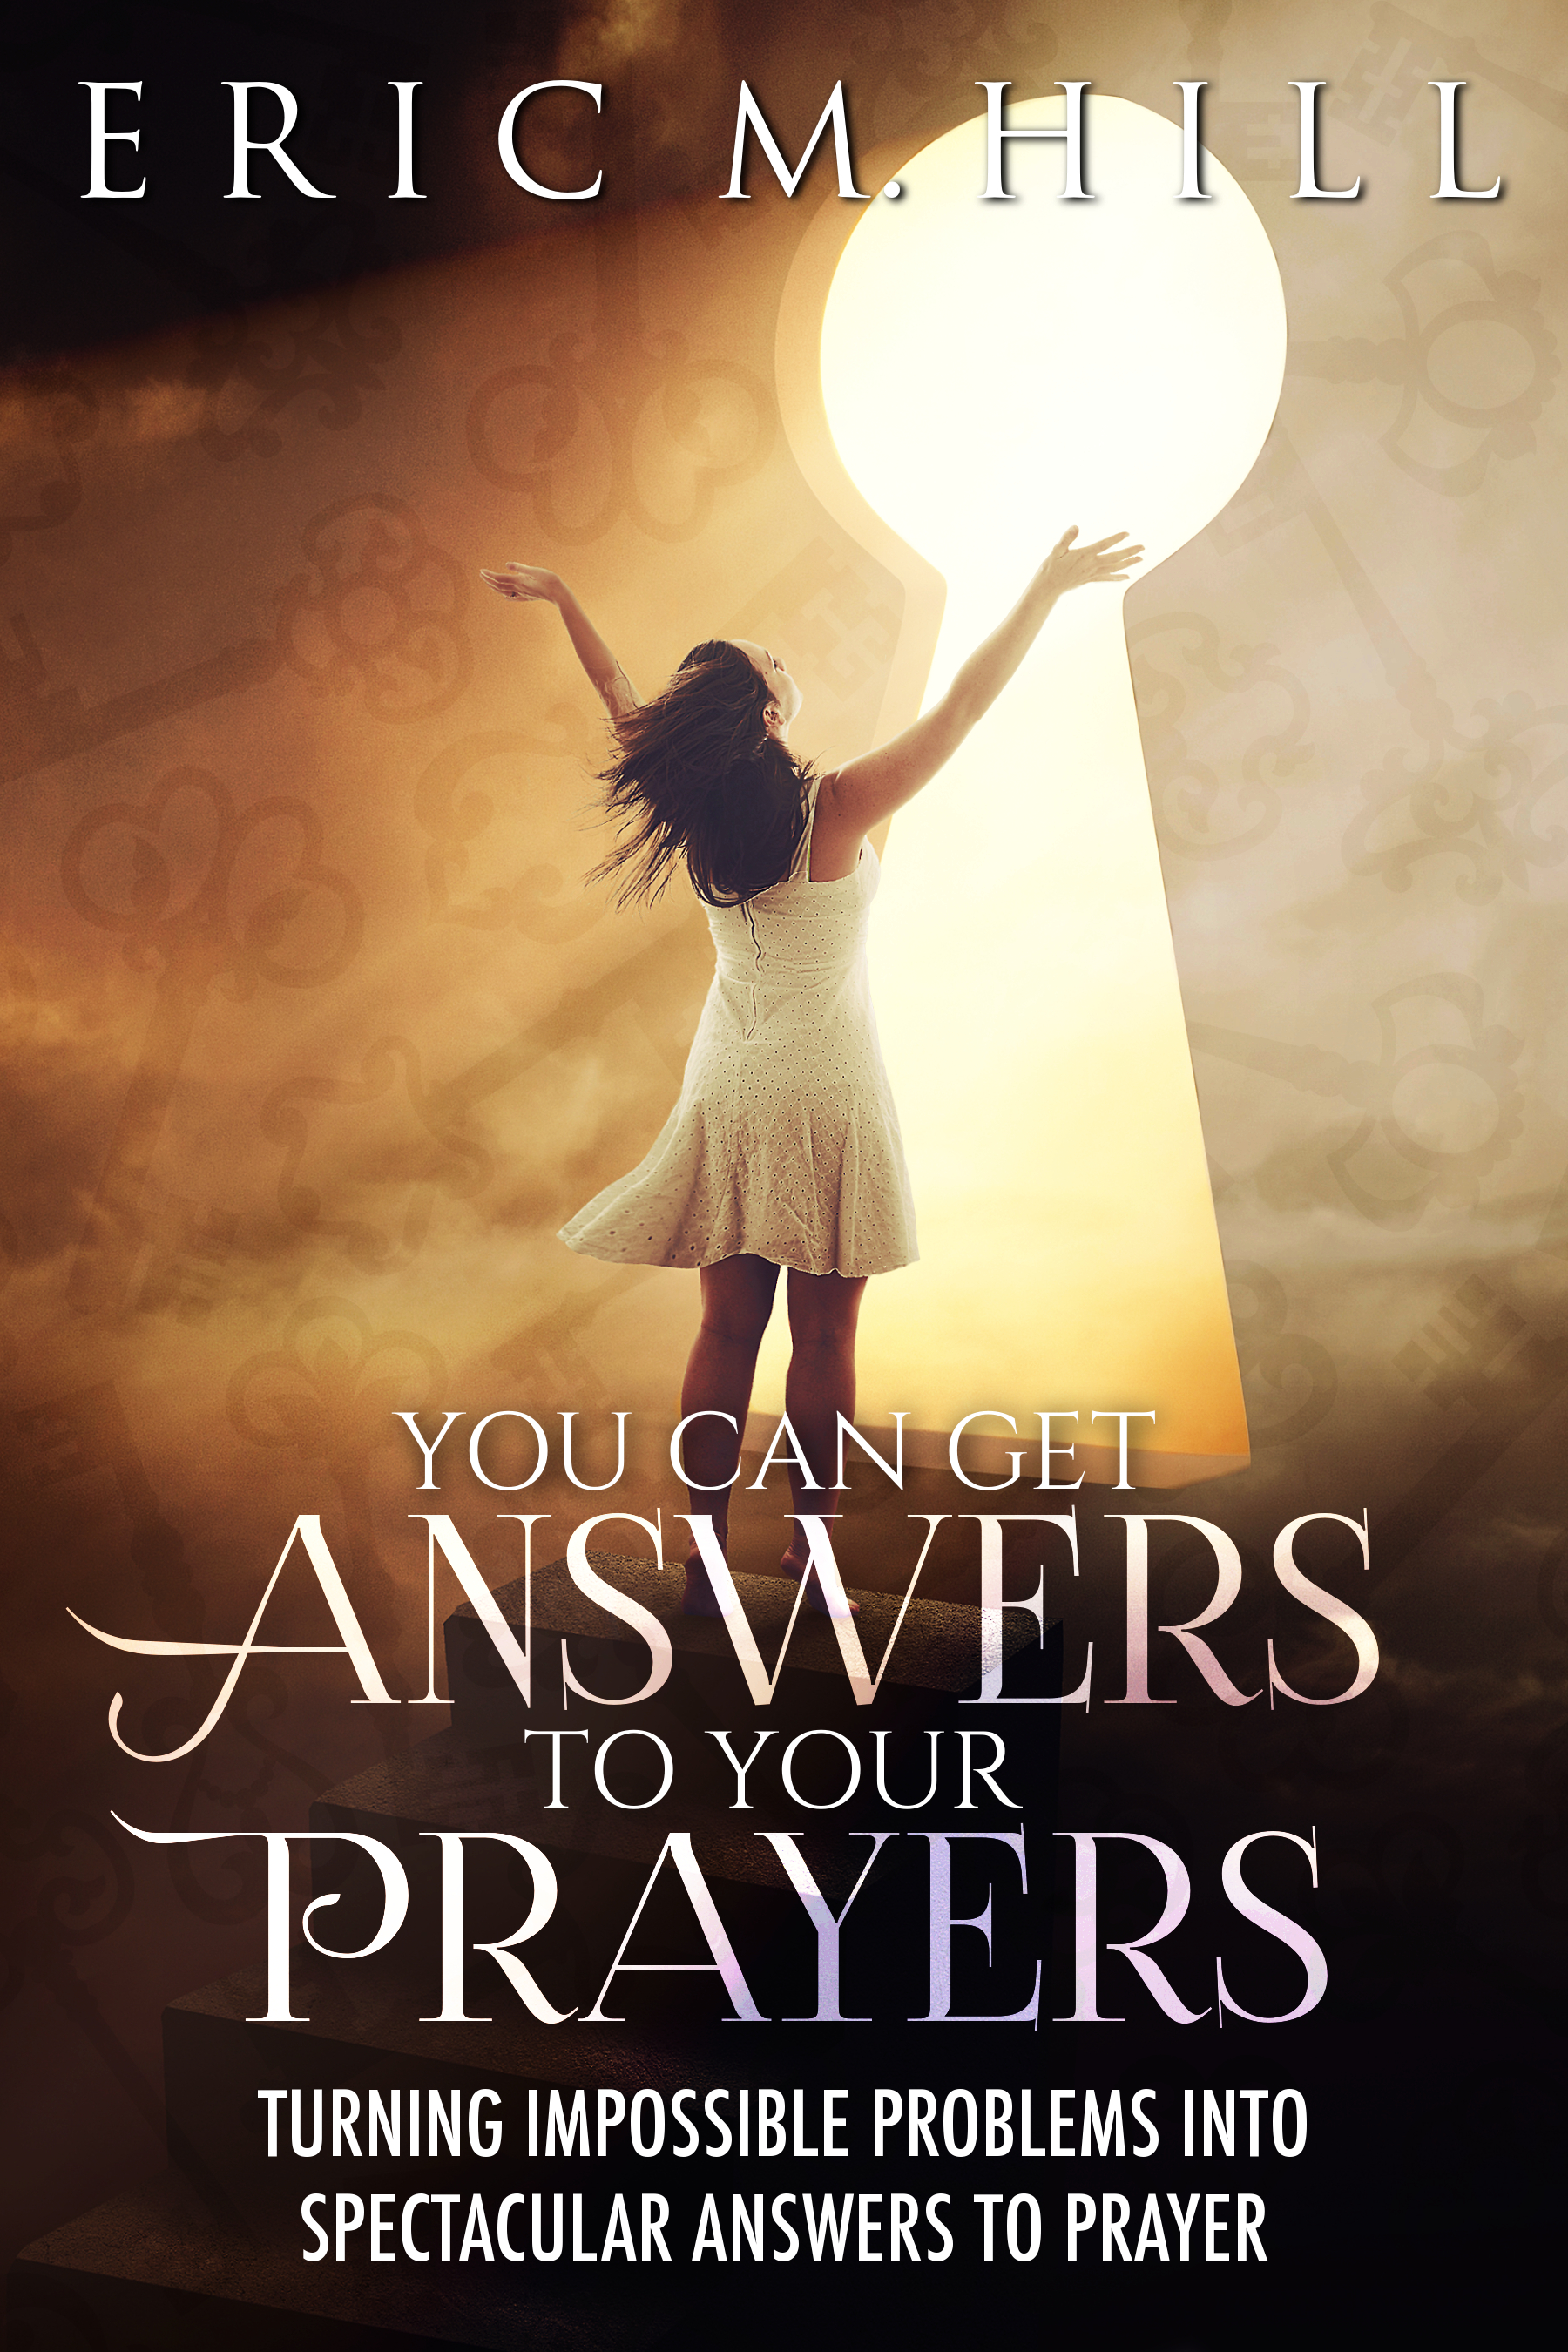 Book cover of You Can Get Answers to Your Prayers. Woman in white dress stands with lifted arms in prayer. She's facing a large key hole. Her prayer unlocks answers.